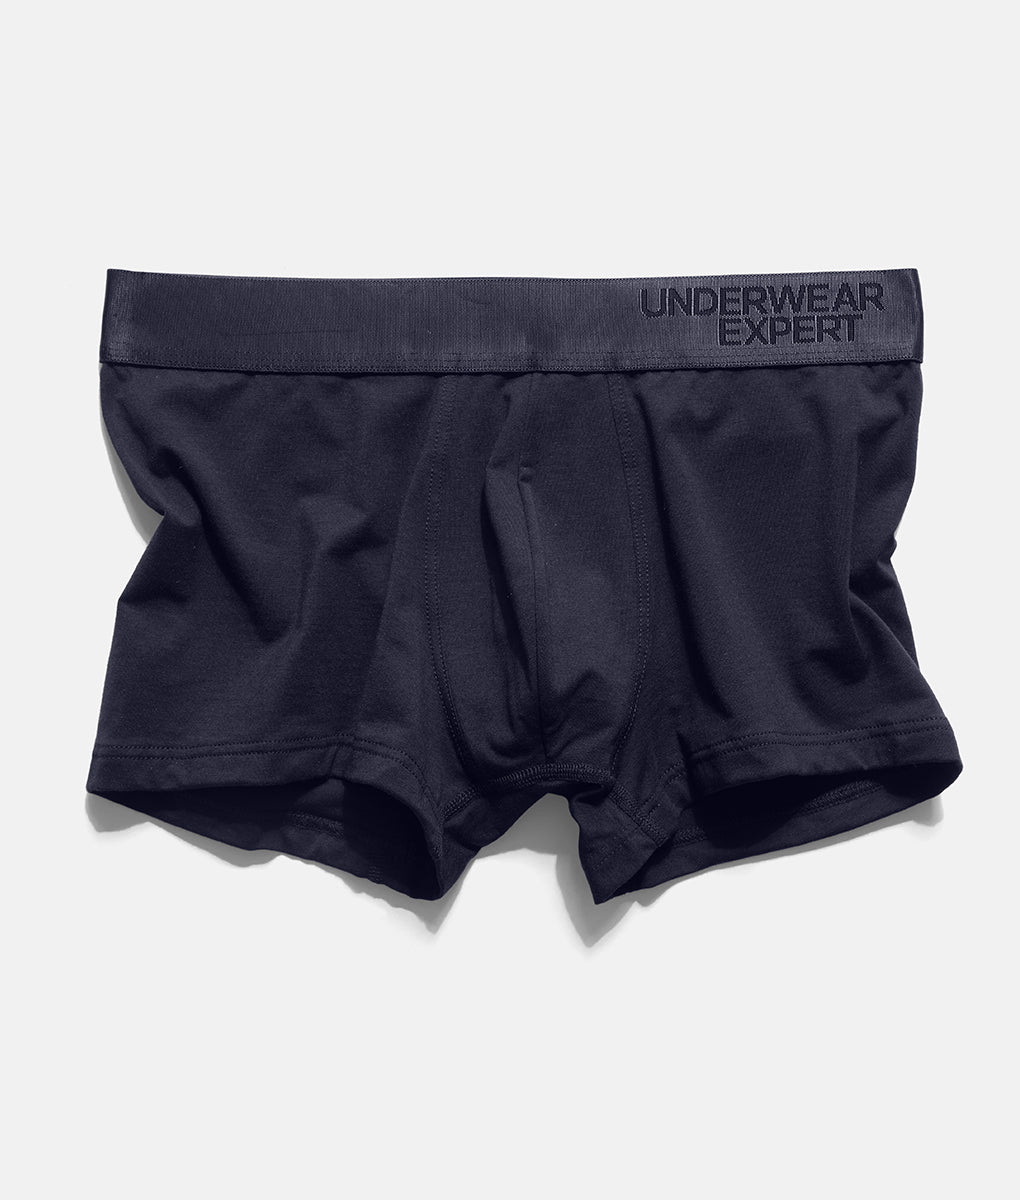 Underwear Expert Men's Trunks Curated Mystery Box, 2 Pairs